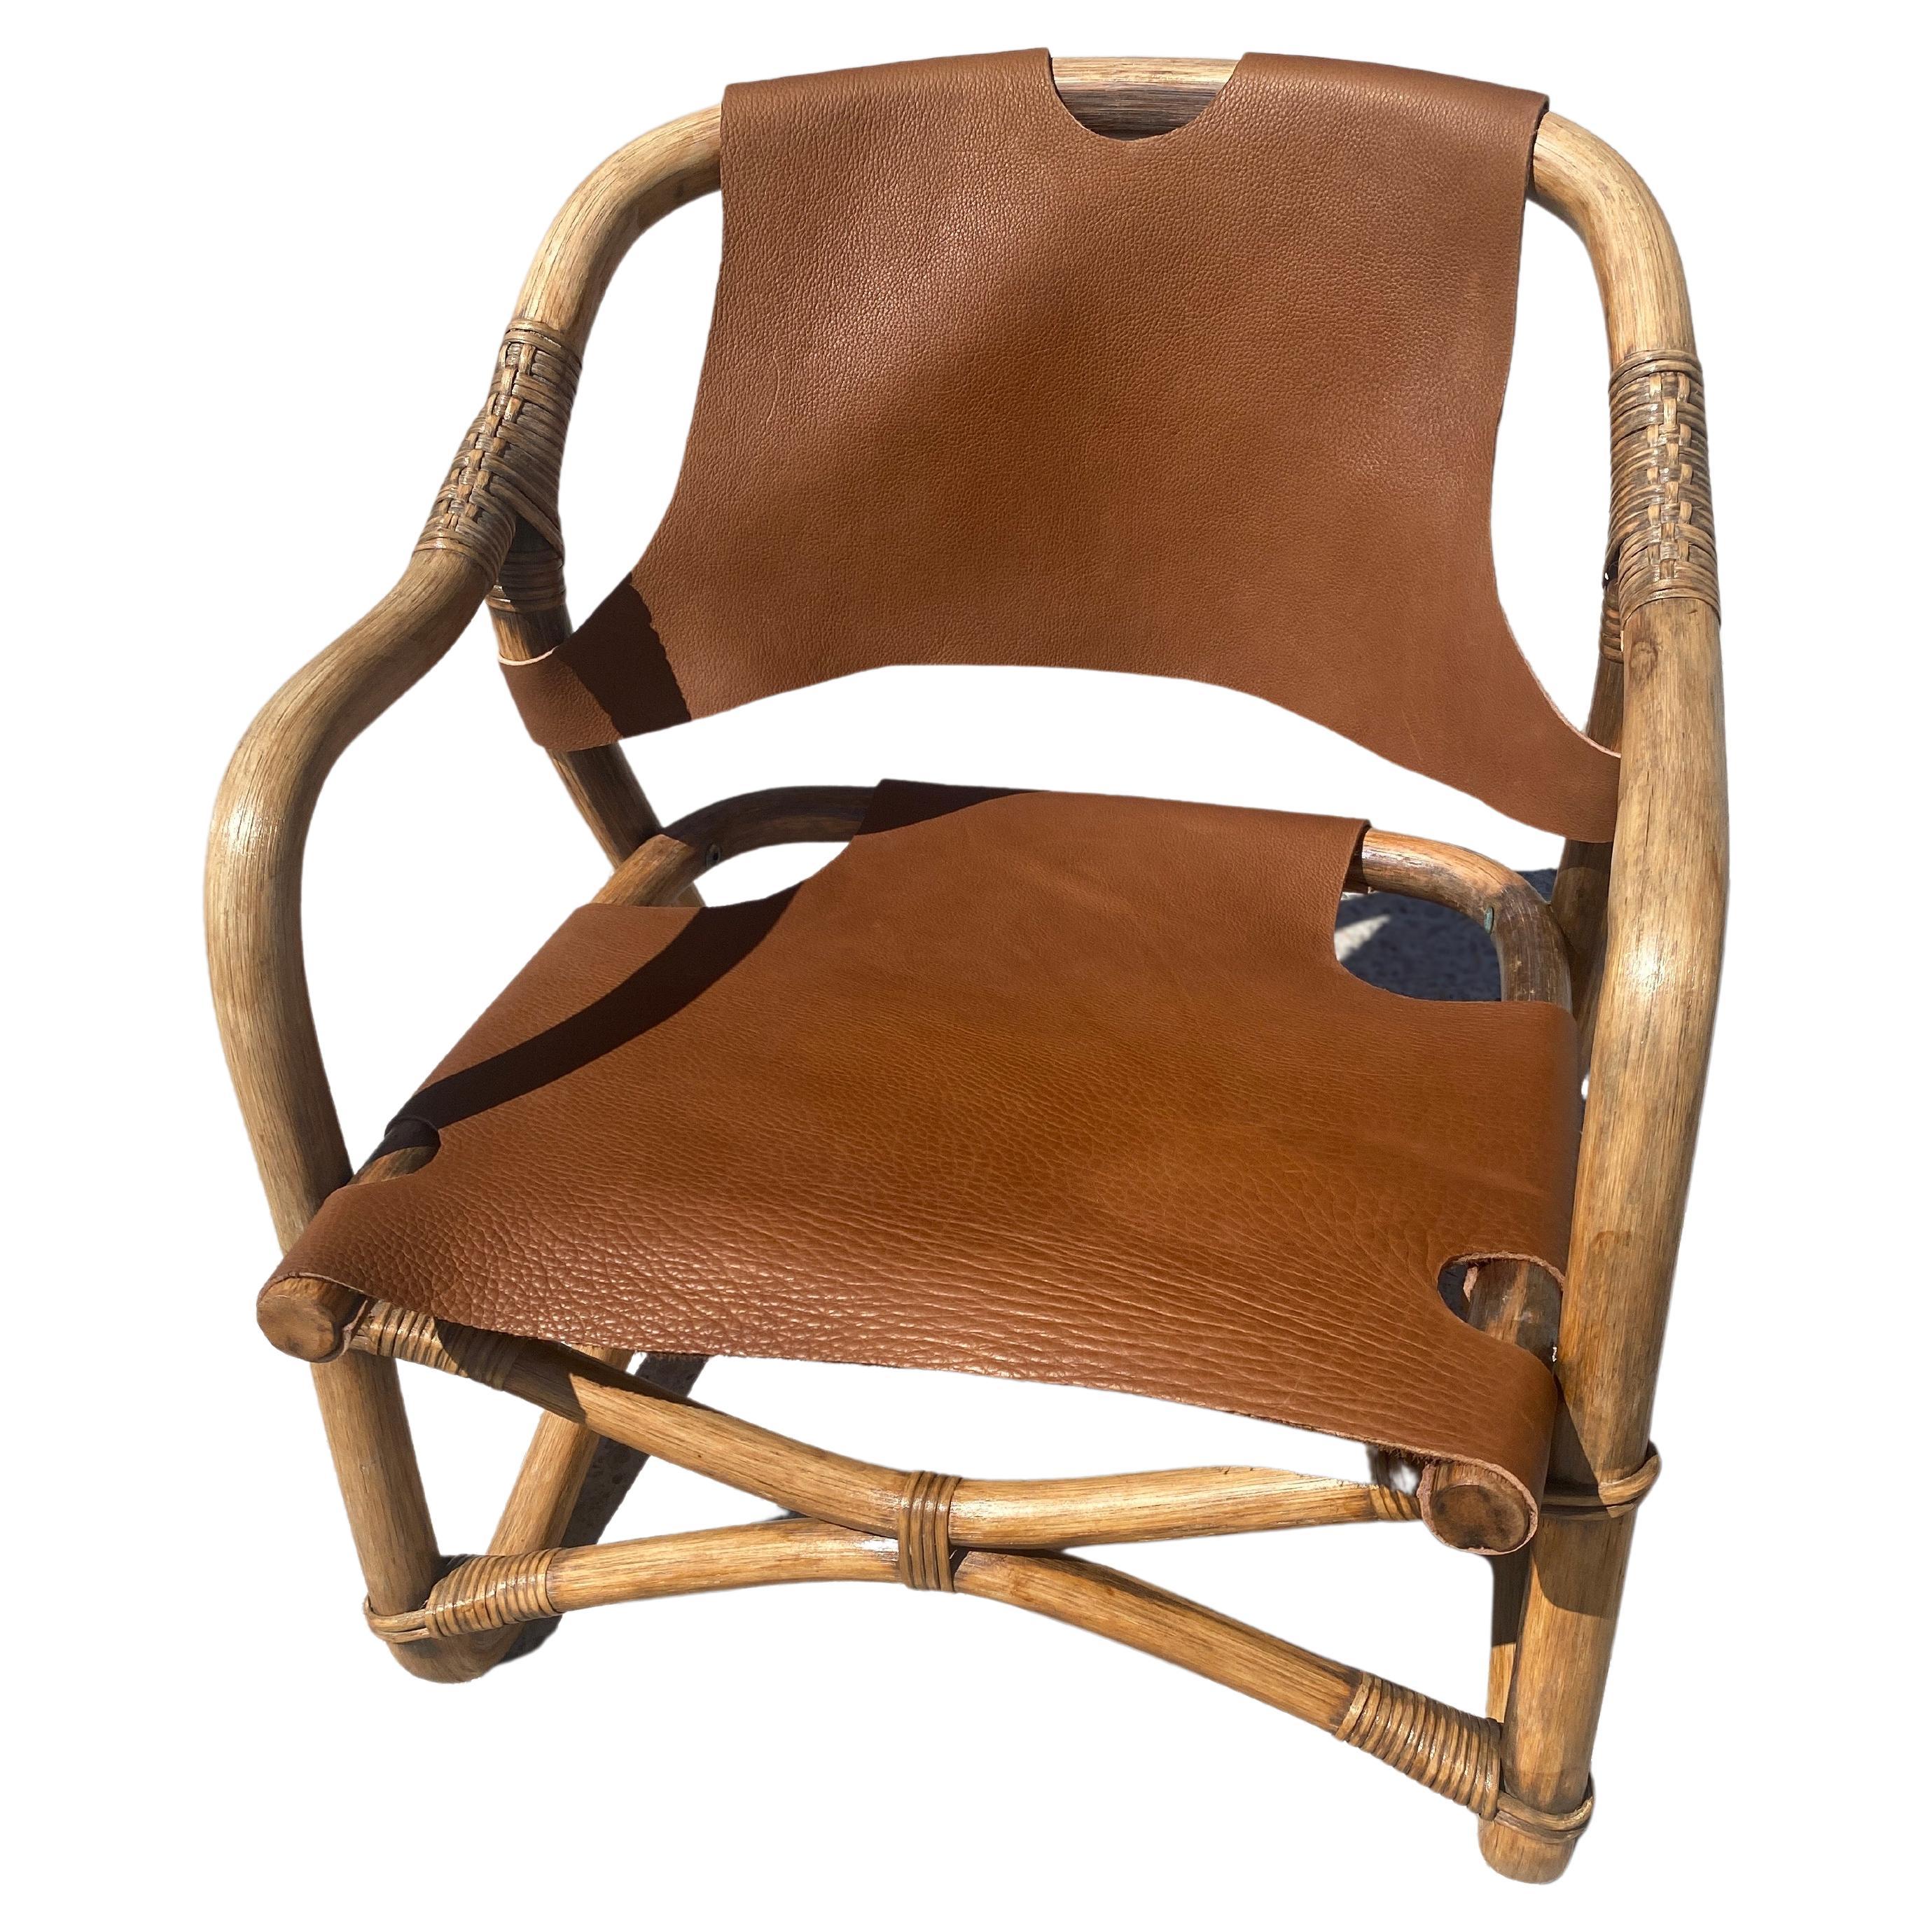 Midcentury Safari Armchair in Bamboo and Leather, Denmark, 1960s For Sale